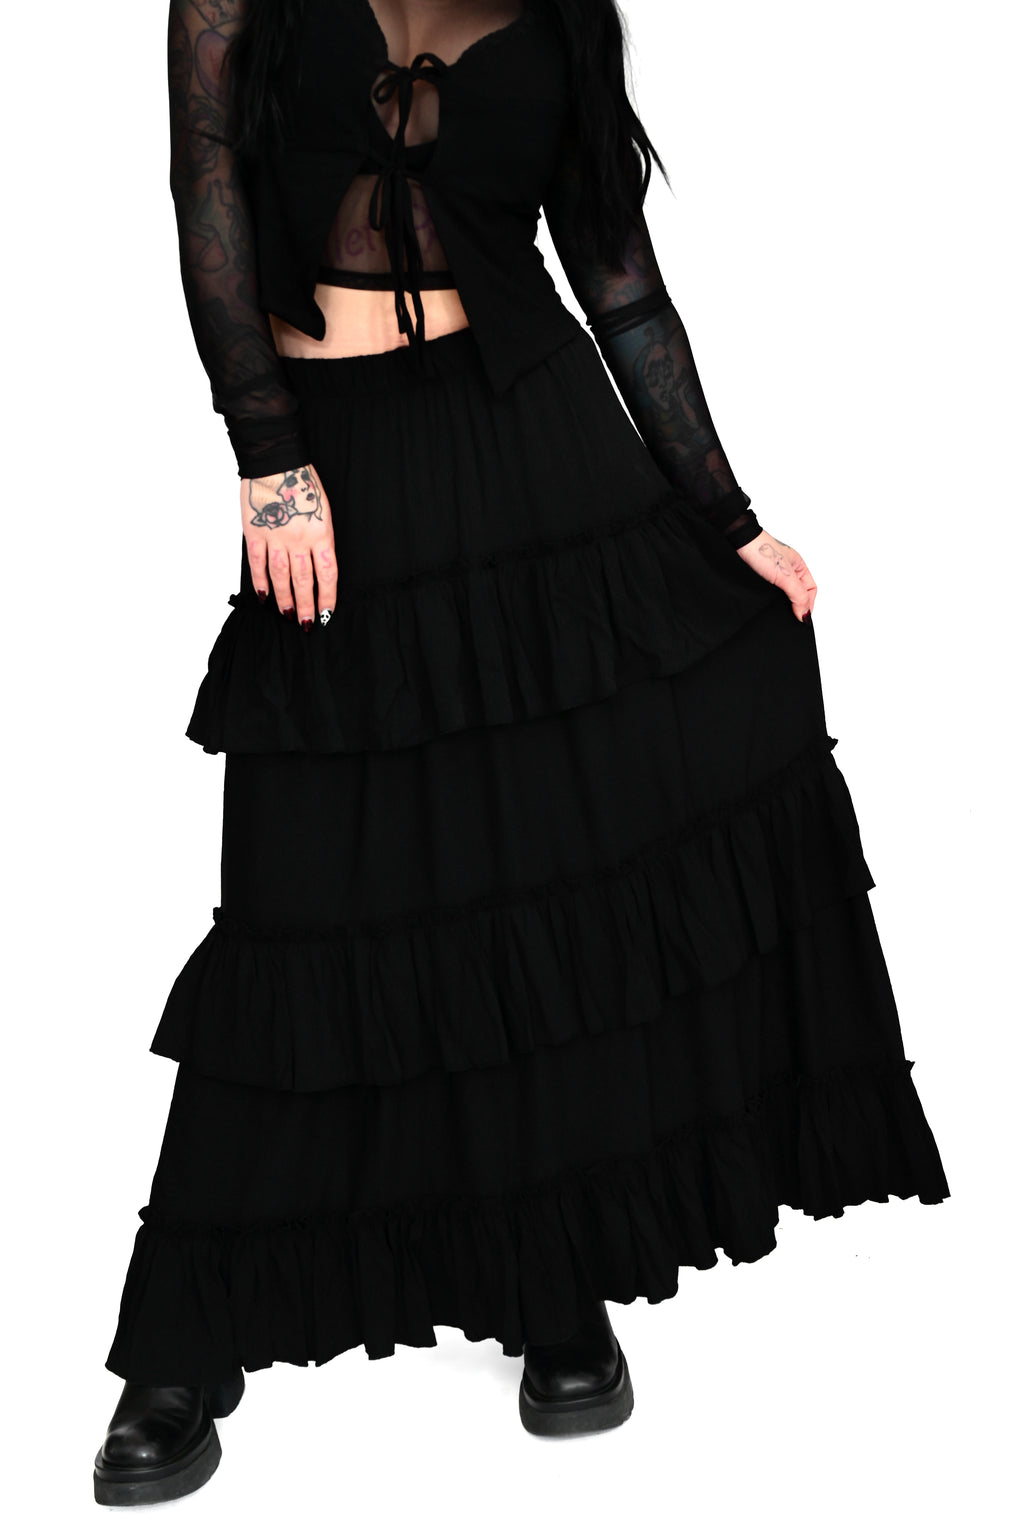 Ruffled & Frilled  High Waisted Black Skirt's Code & Price - RblxTrade